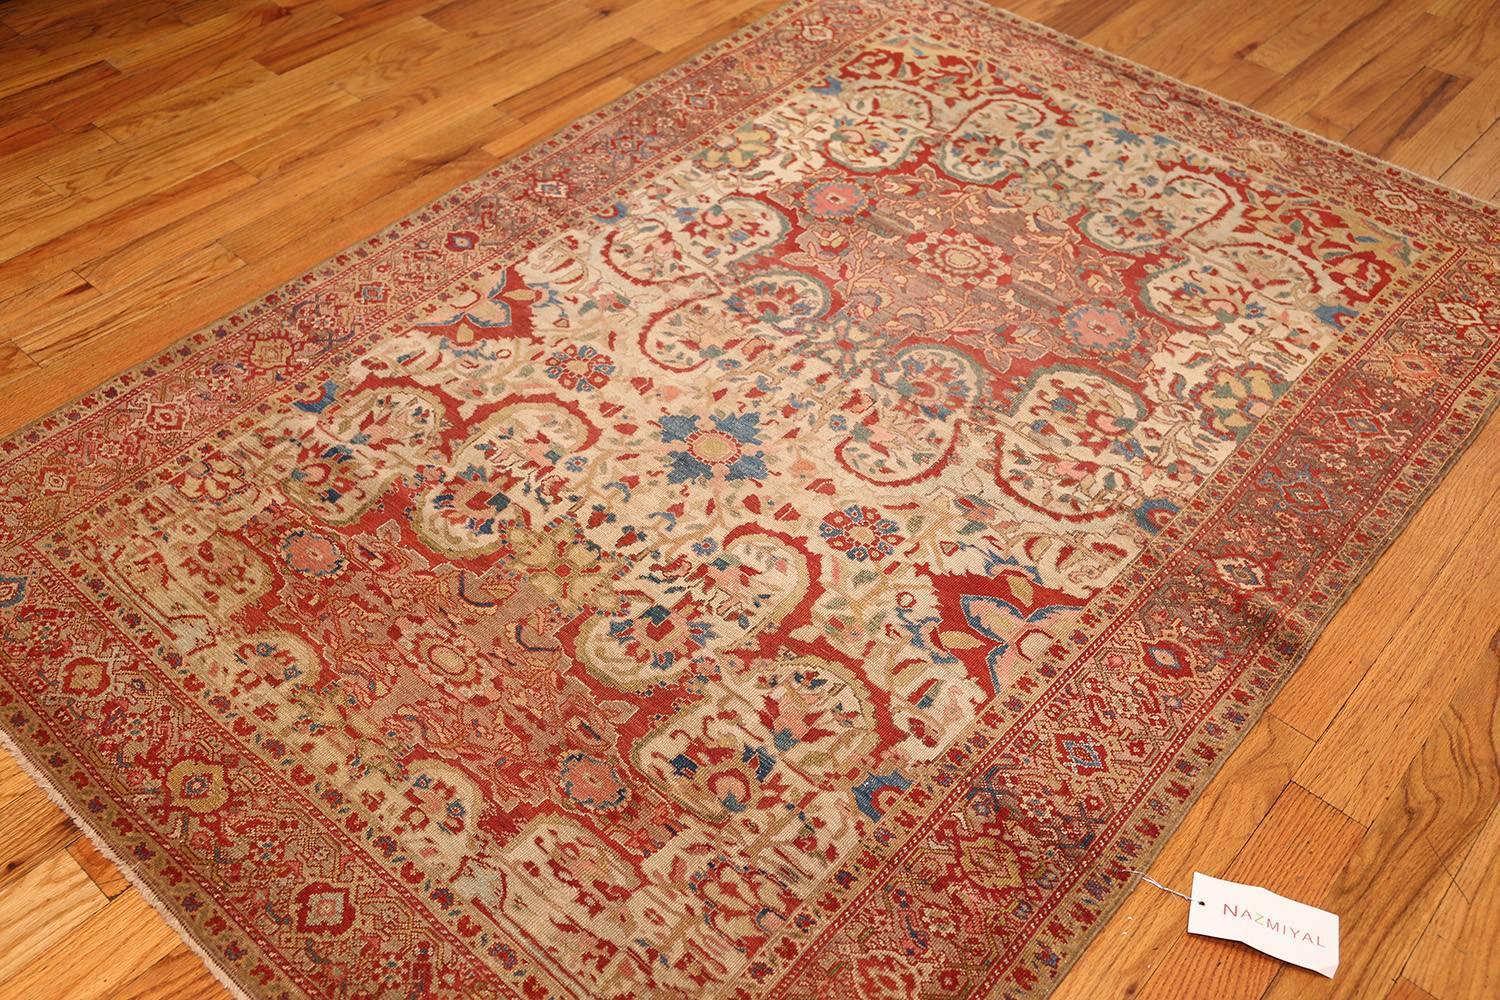 Antique Ivory Persian Mishan Malayer rug 48611, country of origin / rug type: Persian rugs, circa date: late 19th century. Boasting a beautiful array of colors and lines, this exquisite antique Persian Mishan Malayer rug is unique in its